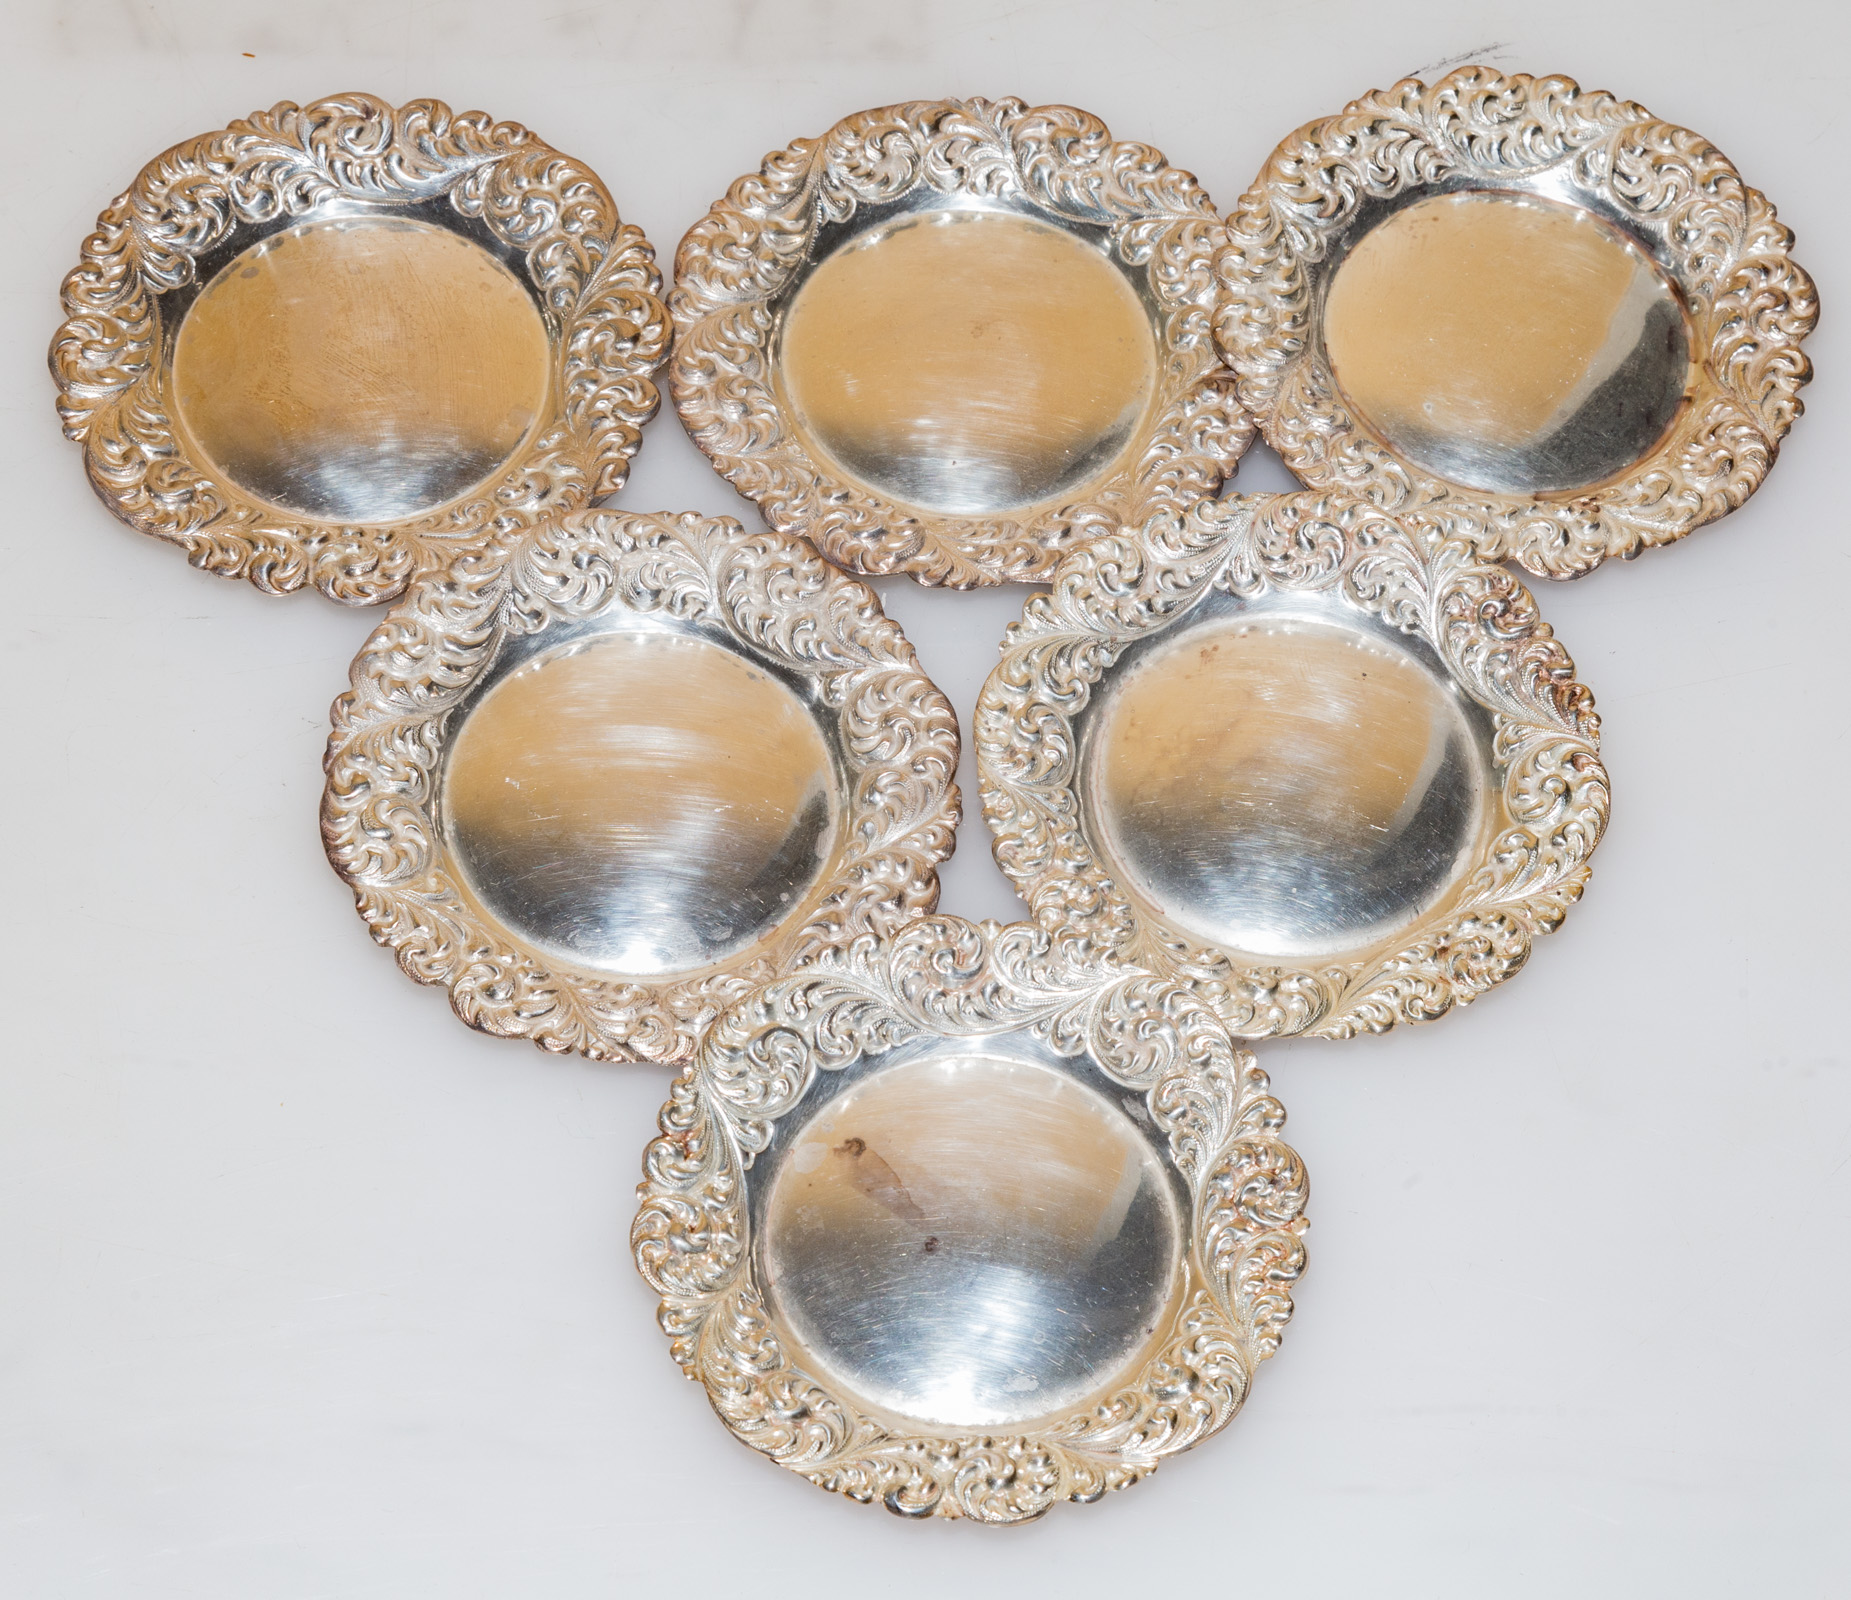 SIX STERLING REPOUSSE BORDER NUT DISHES